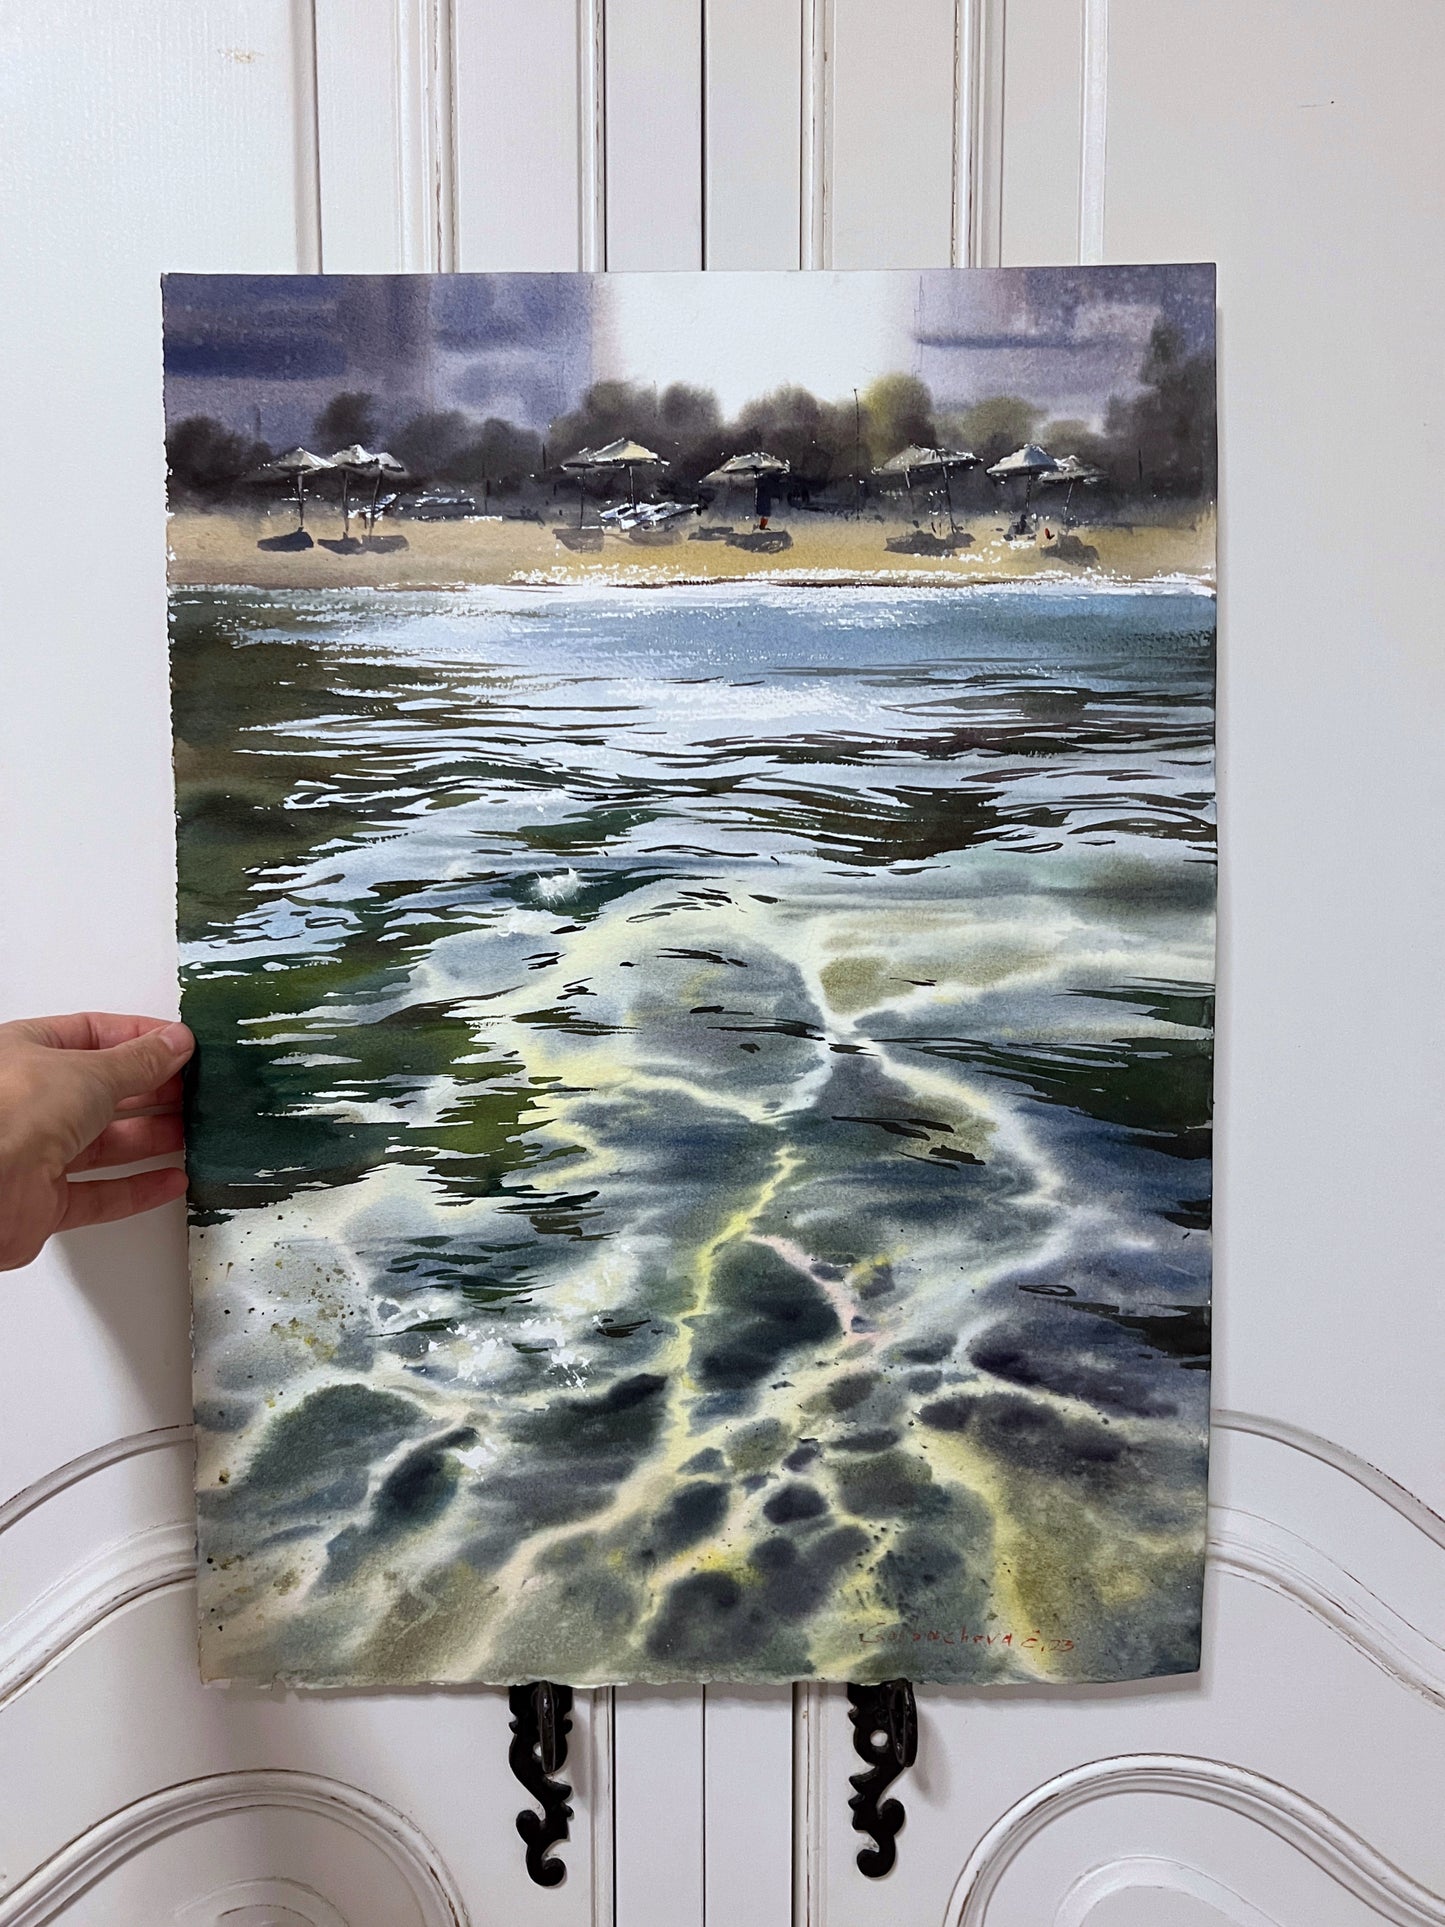 "Beach on the sea coast" Coastal Painting - Hand-Painted Watercolor, Reflective Seascape - 15x20 in